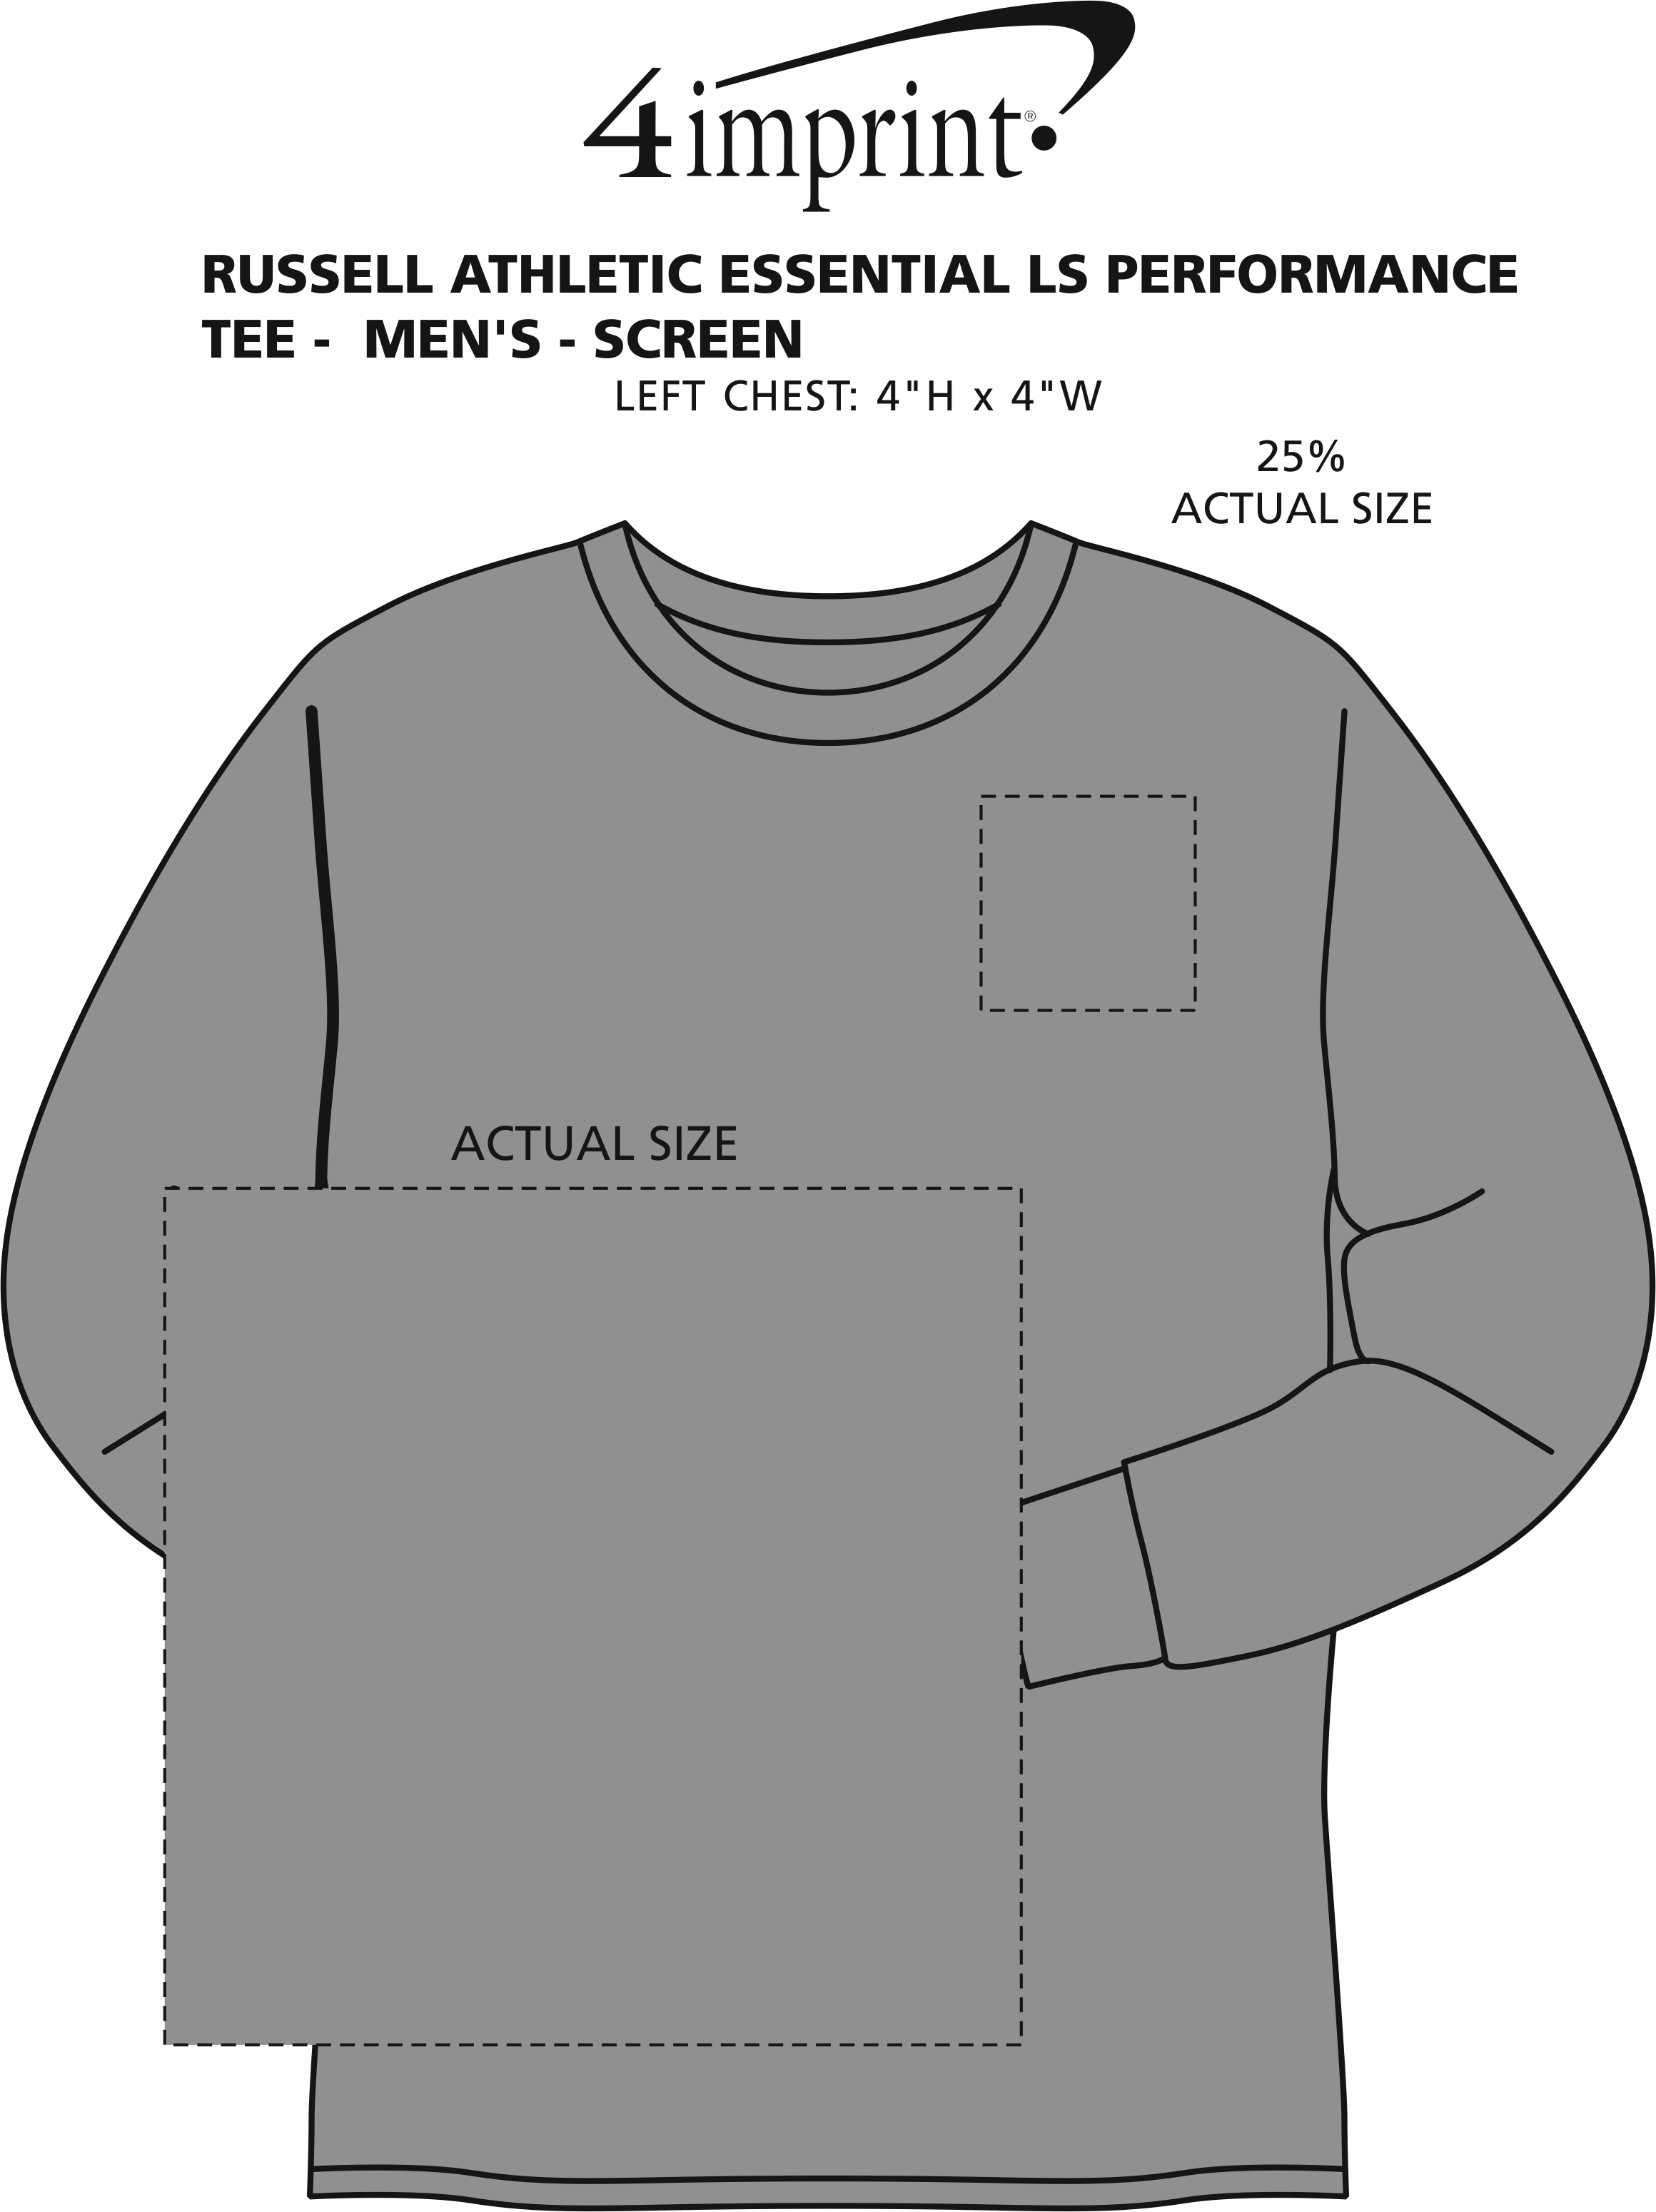 Imprint Area of Russell Athletic Essential LS Performance Tee - Men's - Screen